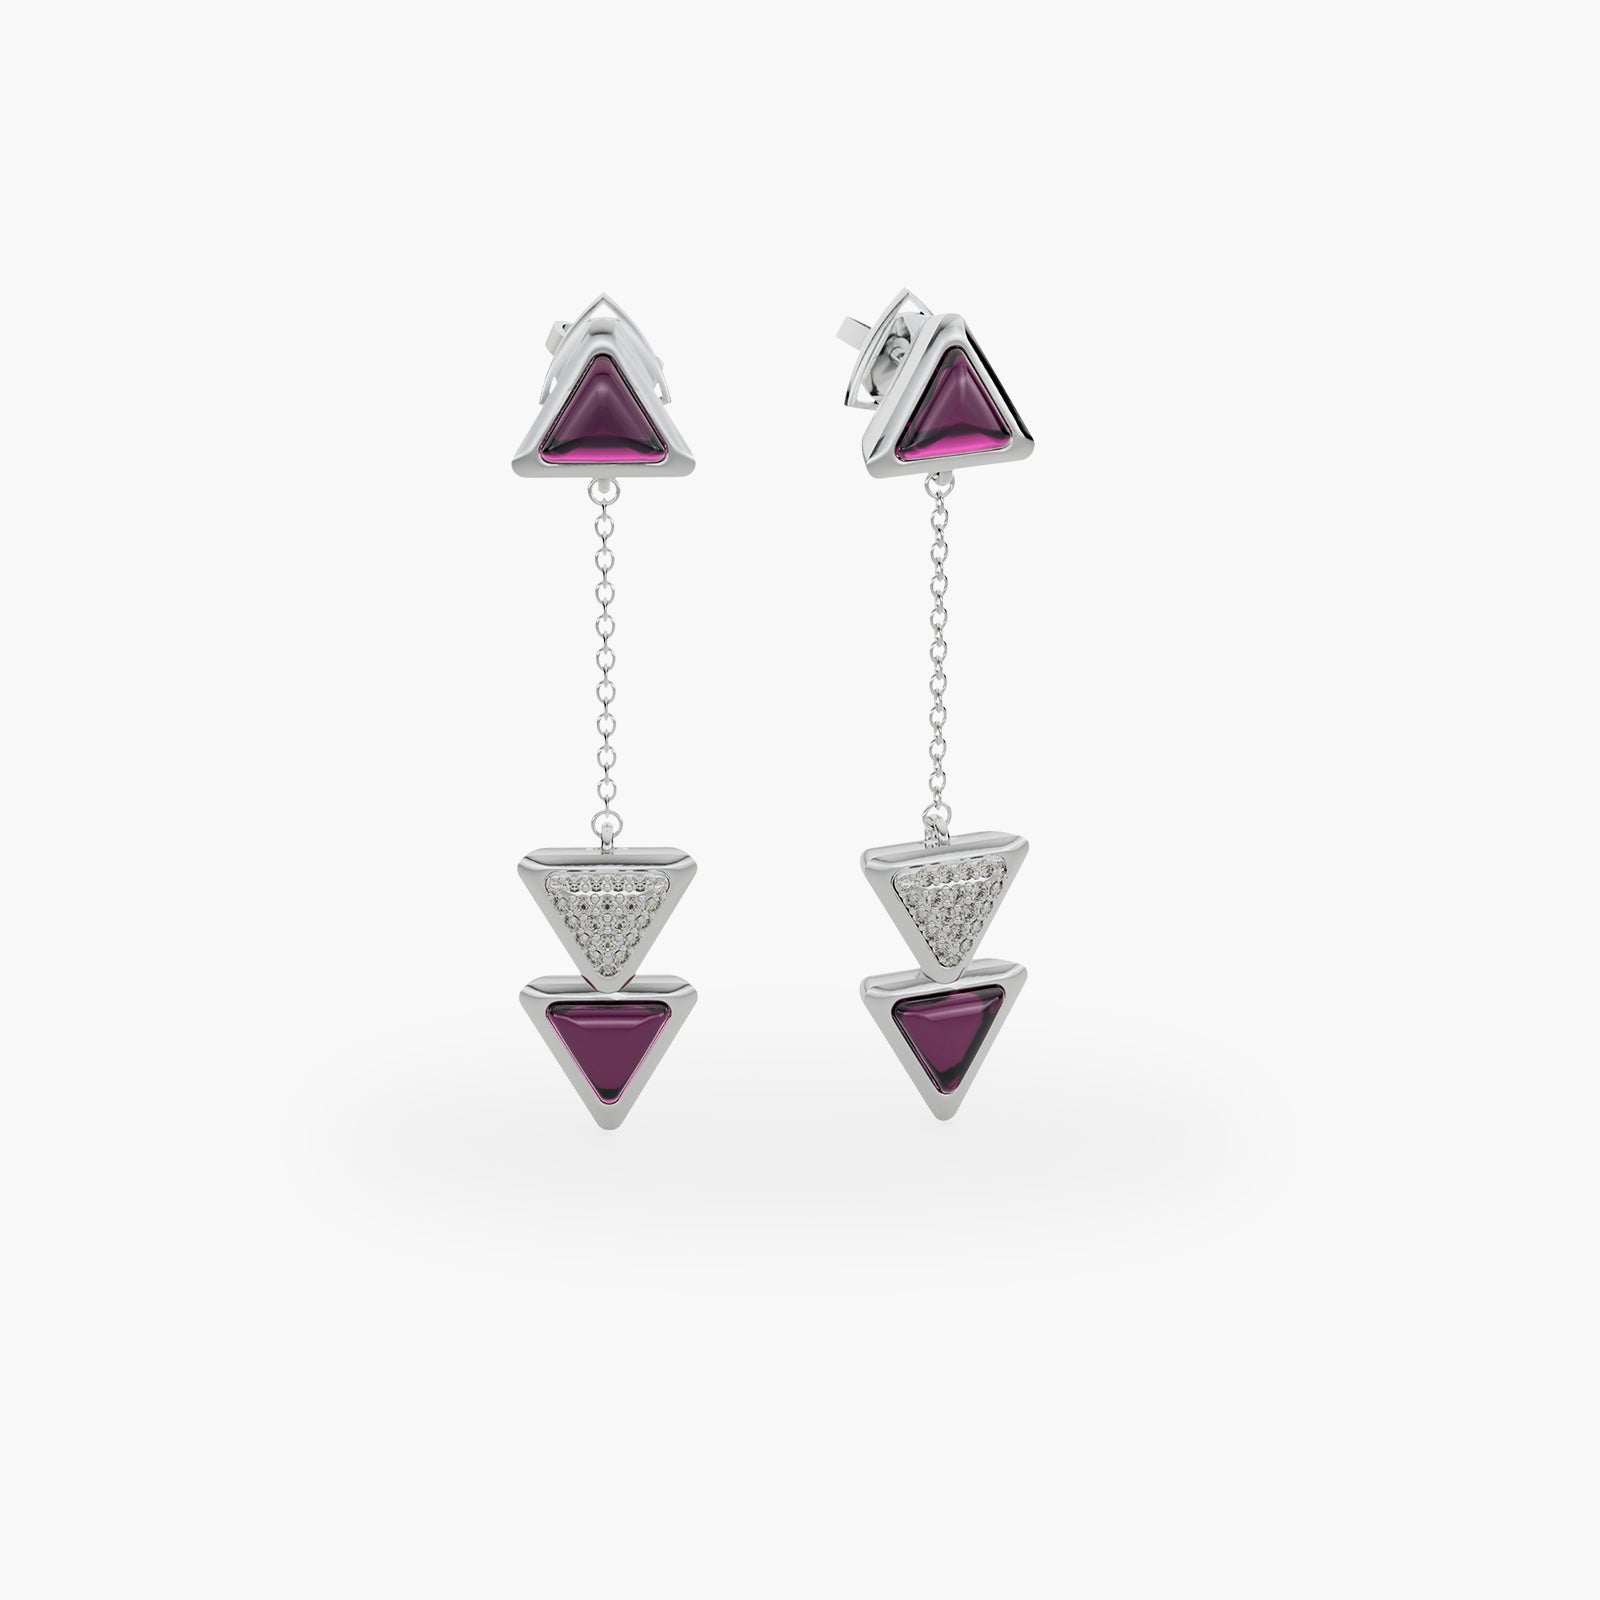 Earrings Dove Vai Rewind Exquisite White Gold Pink Garnet and Diamonds